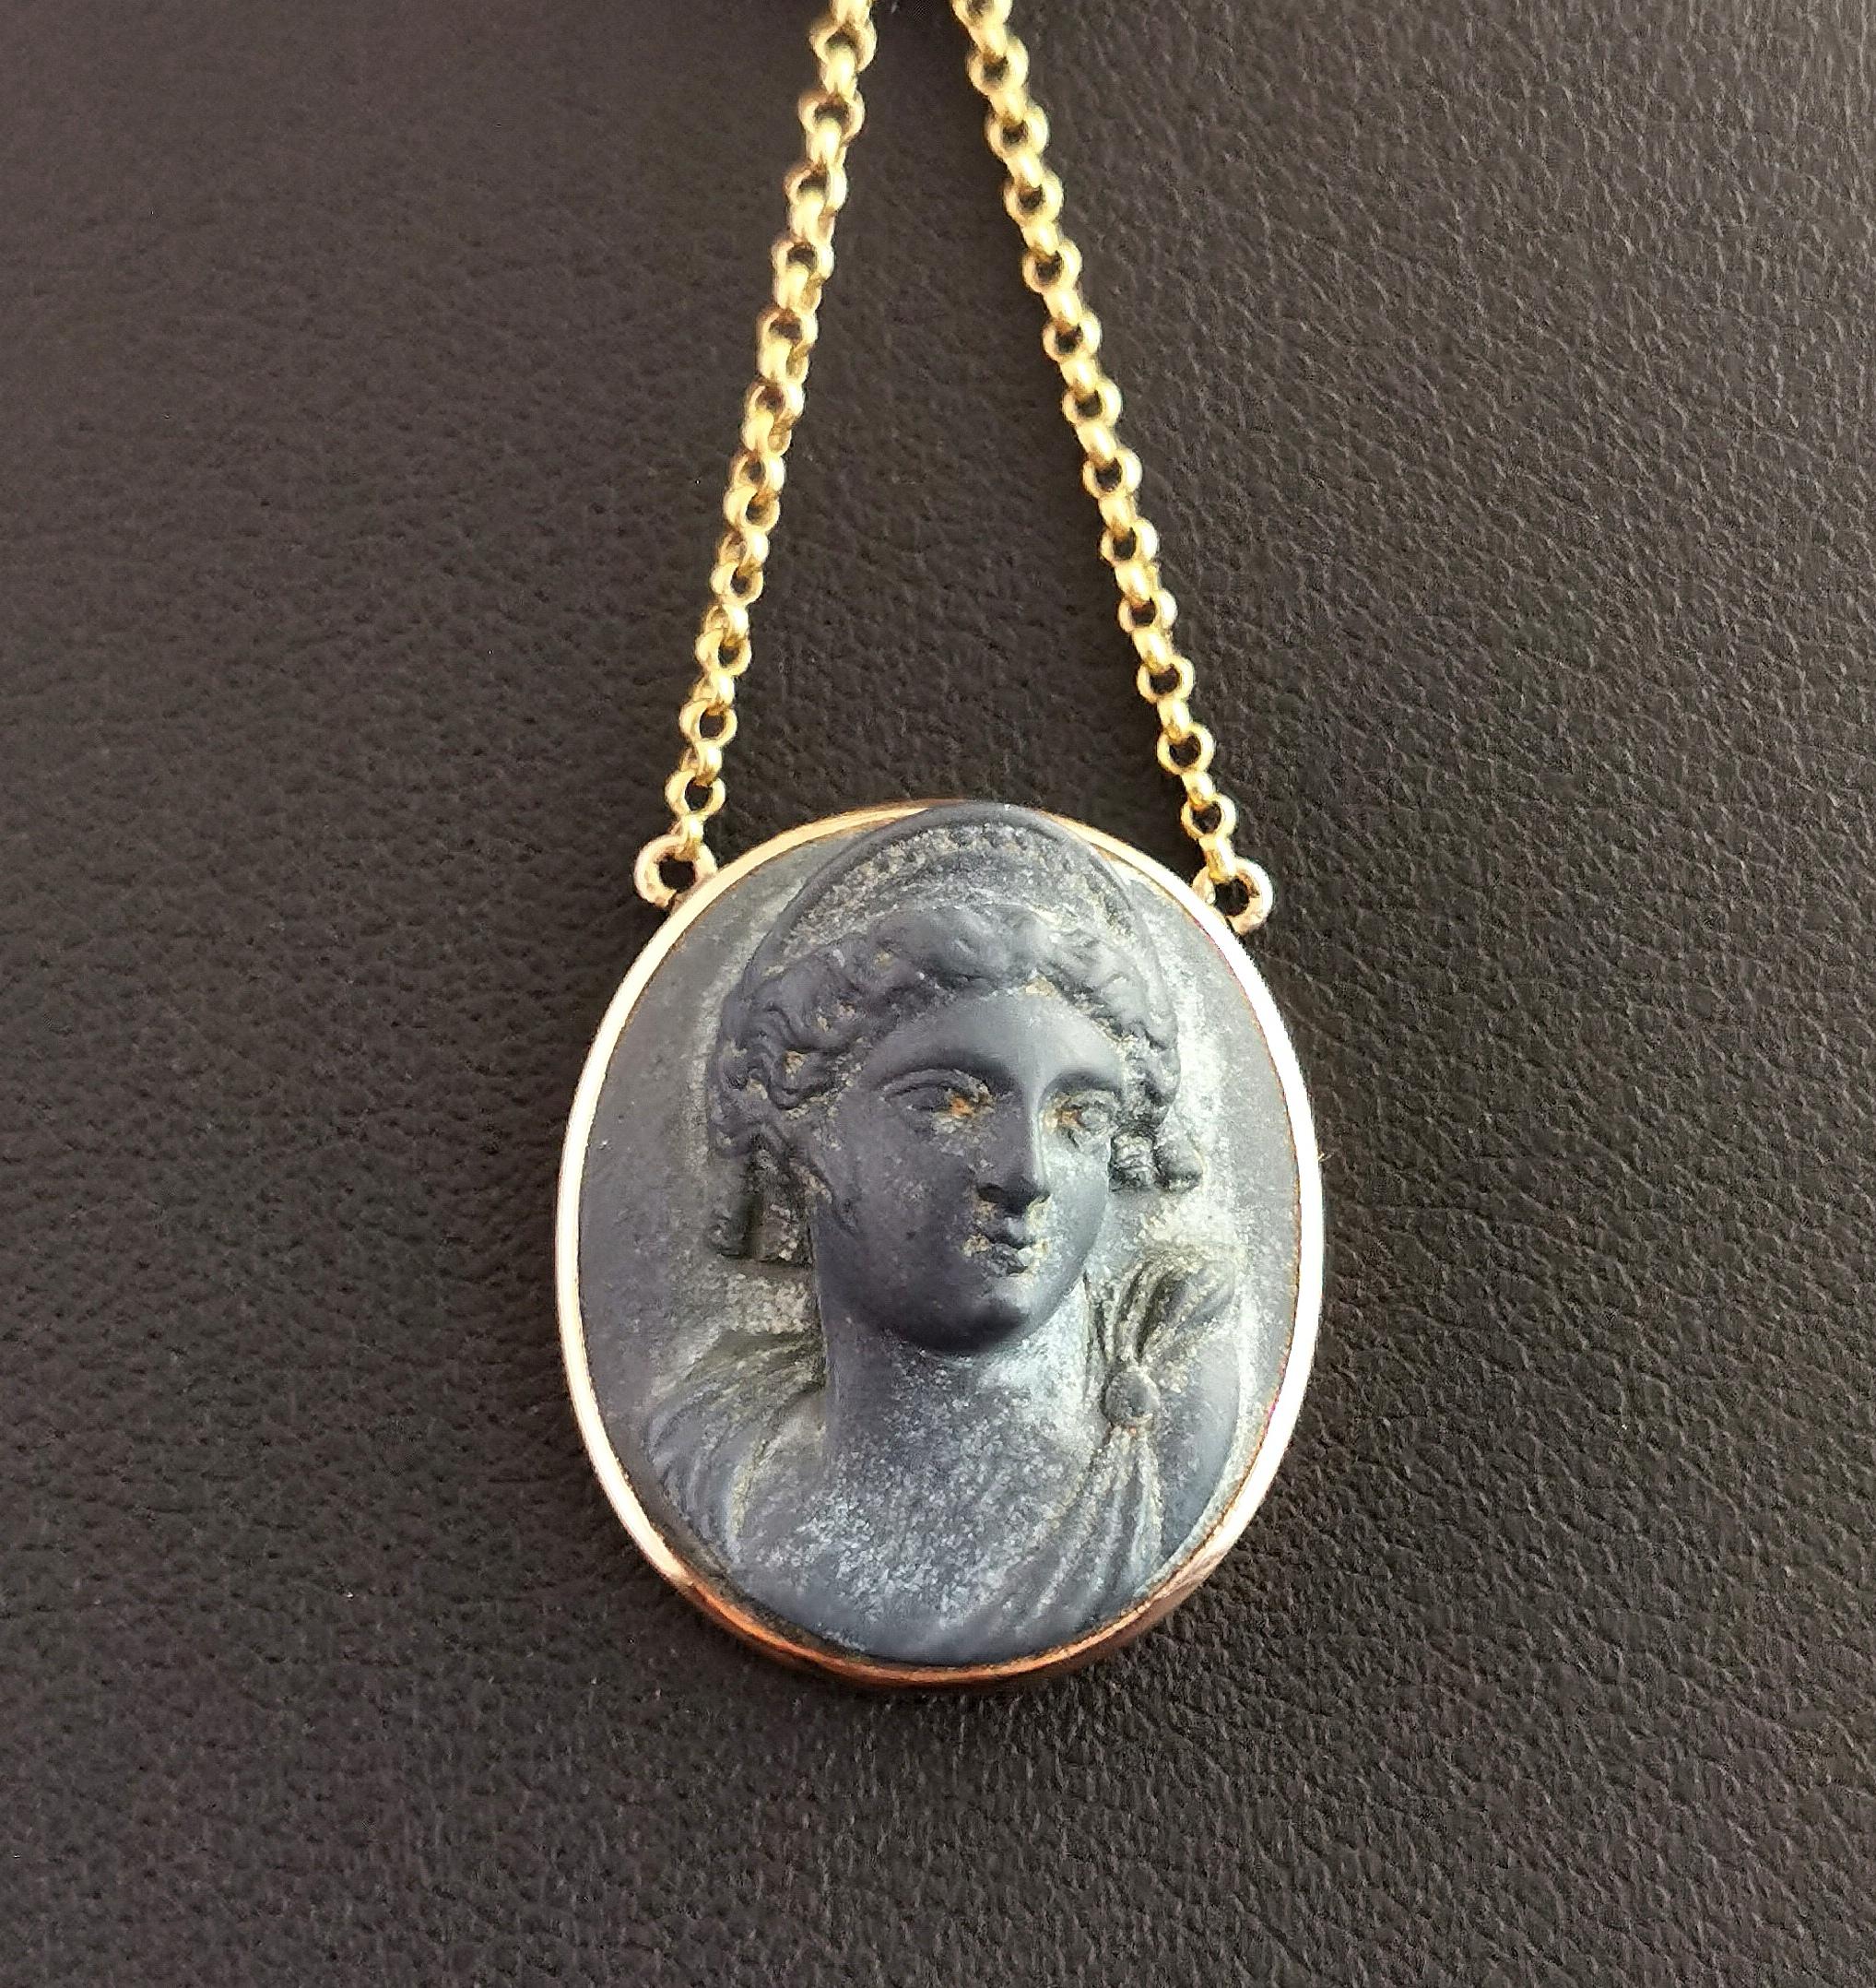 A beautiful antique, late 19th century Lava Cameo pendant.

It has a dark grey ashy tone, finely carved with the profile of a classical lady.

Lava Cameos and Lava stone jewellery rose to fashion in the Grand Tour era, early 19th century.

They